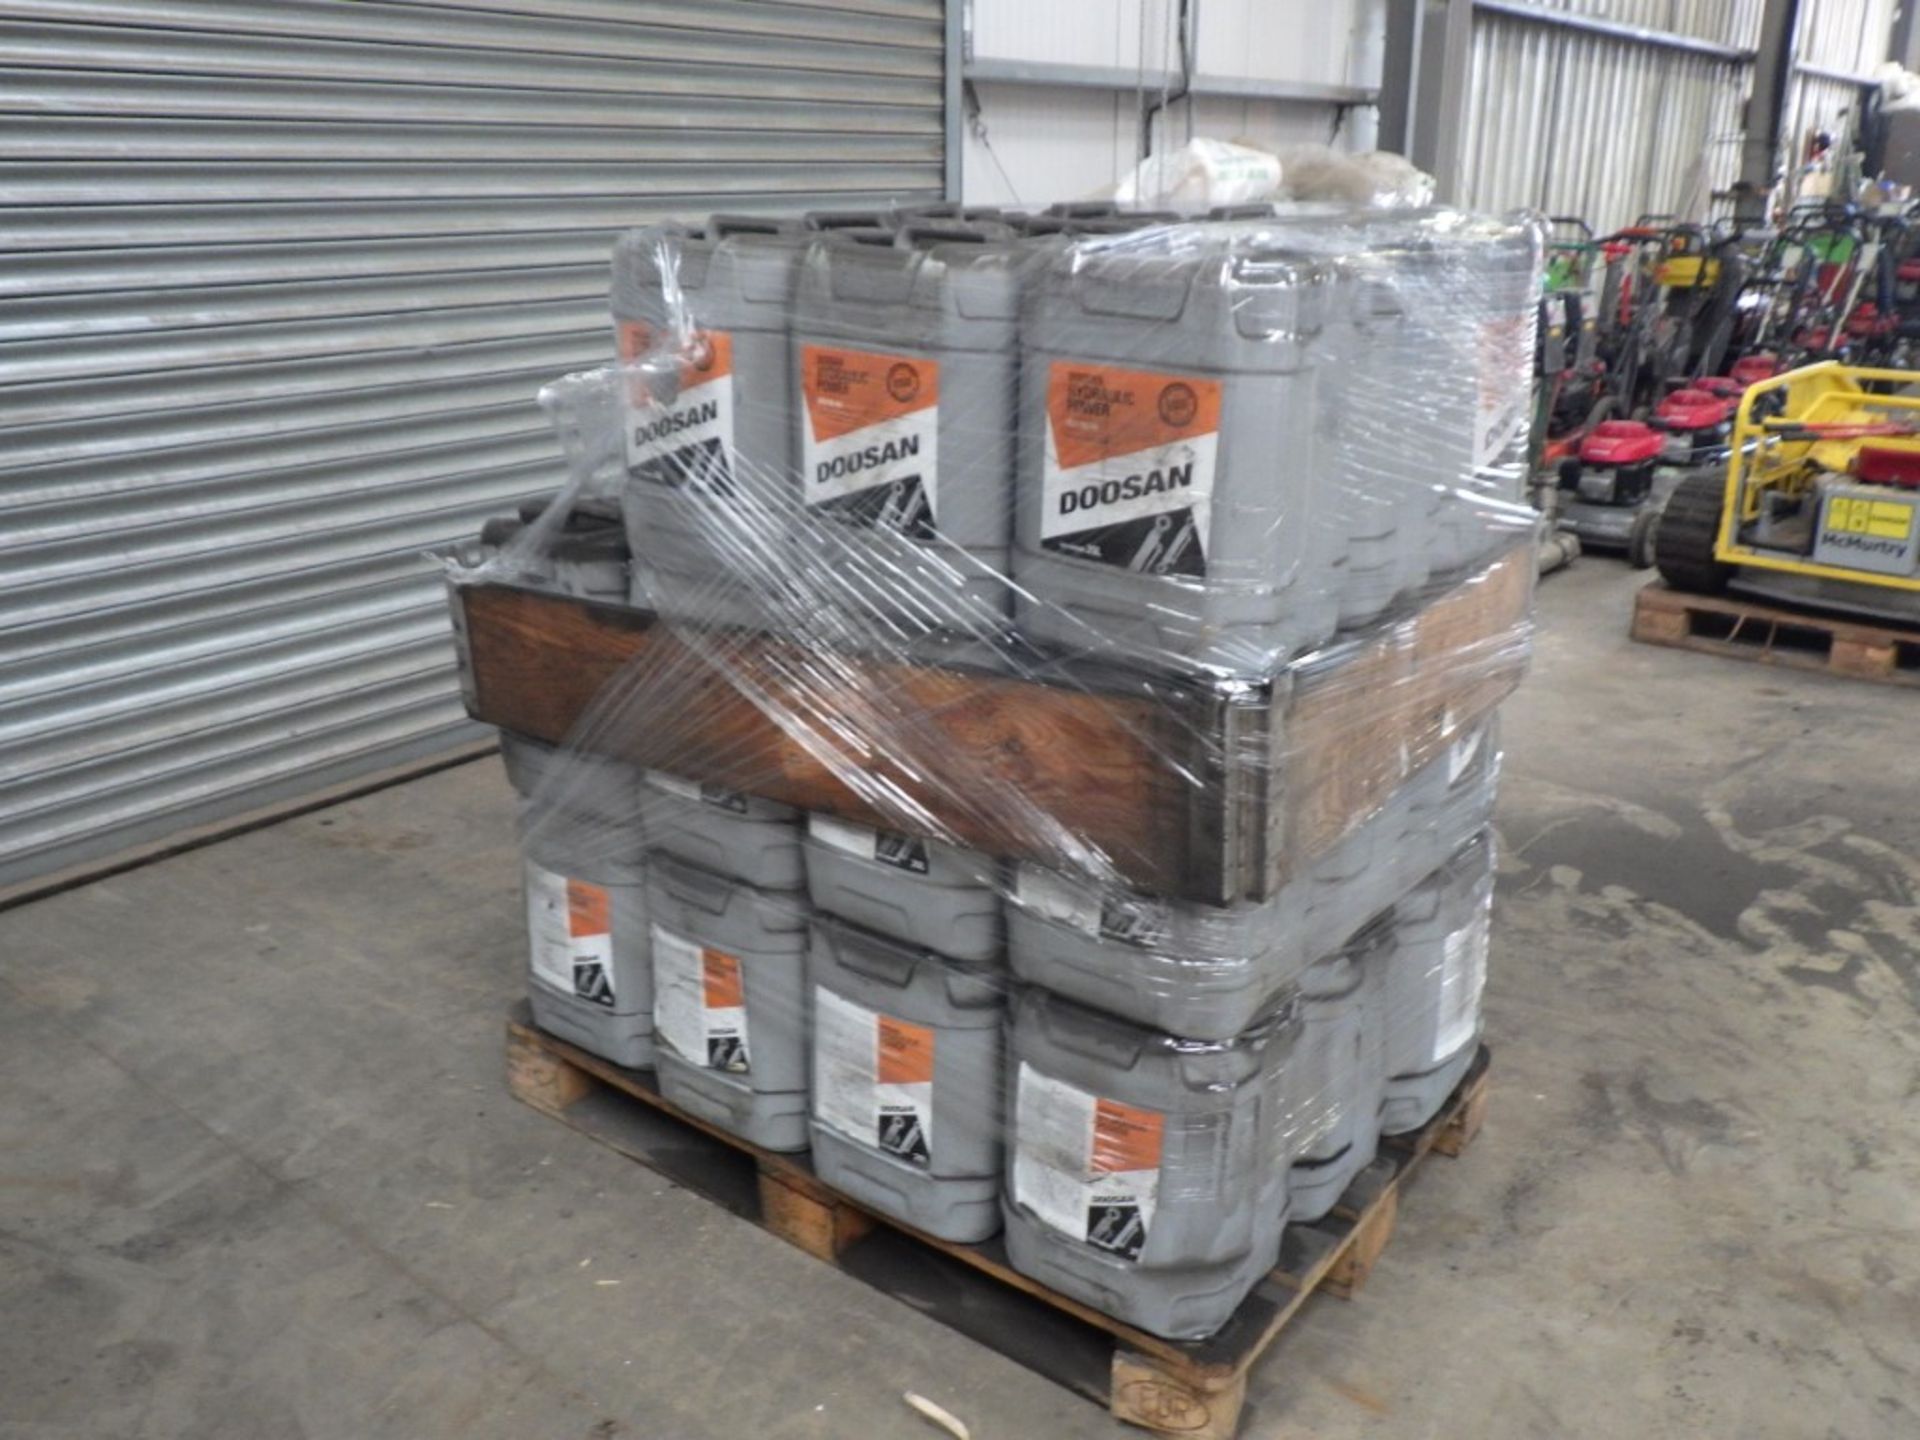 DOOSAN ISO VG 46 HYDRAULIC OIL 20L SYNTHETIC BASED, 20 L CONTAINERS (36 OF)